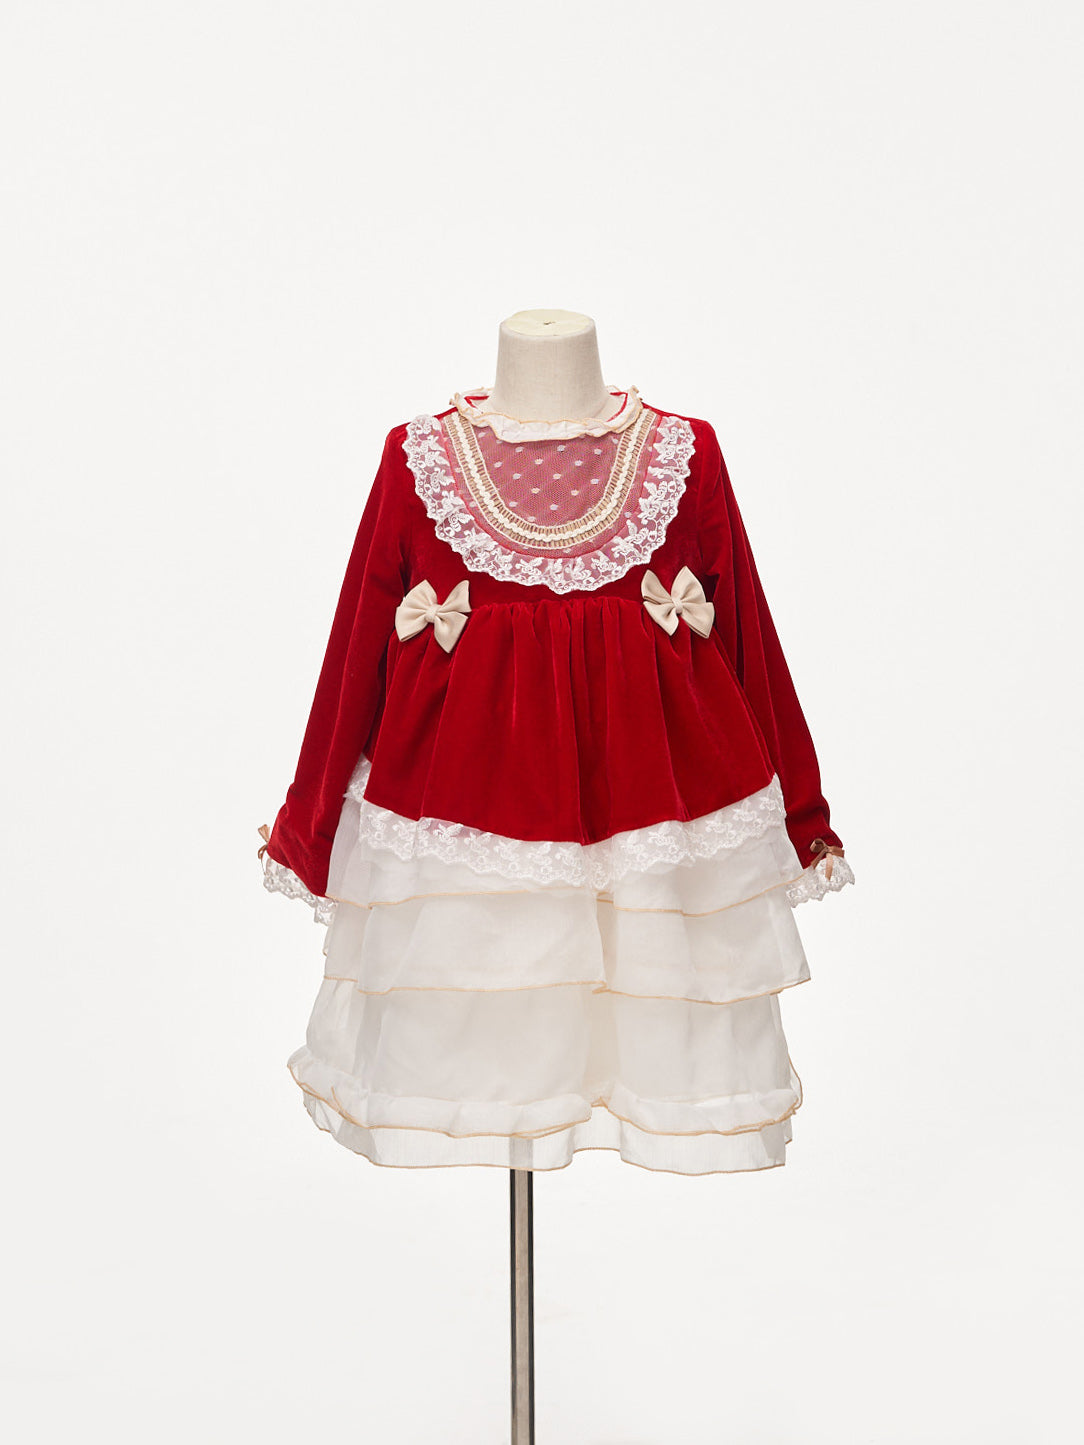 Kate Red Vintage Bow Tie Lace Princess Kids Dress for Photography